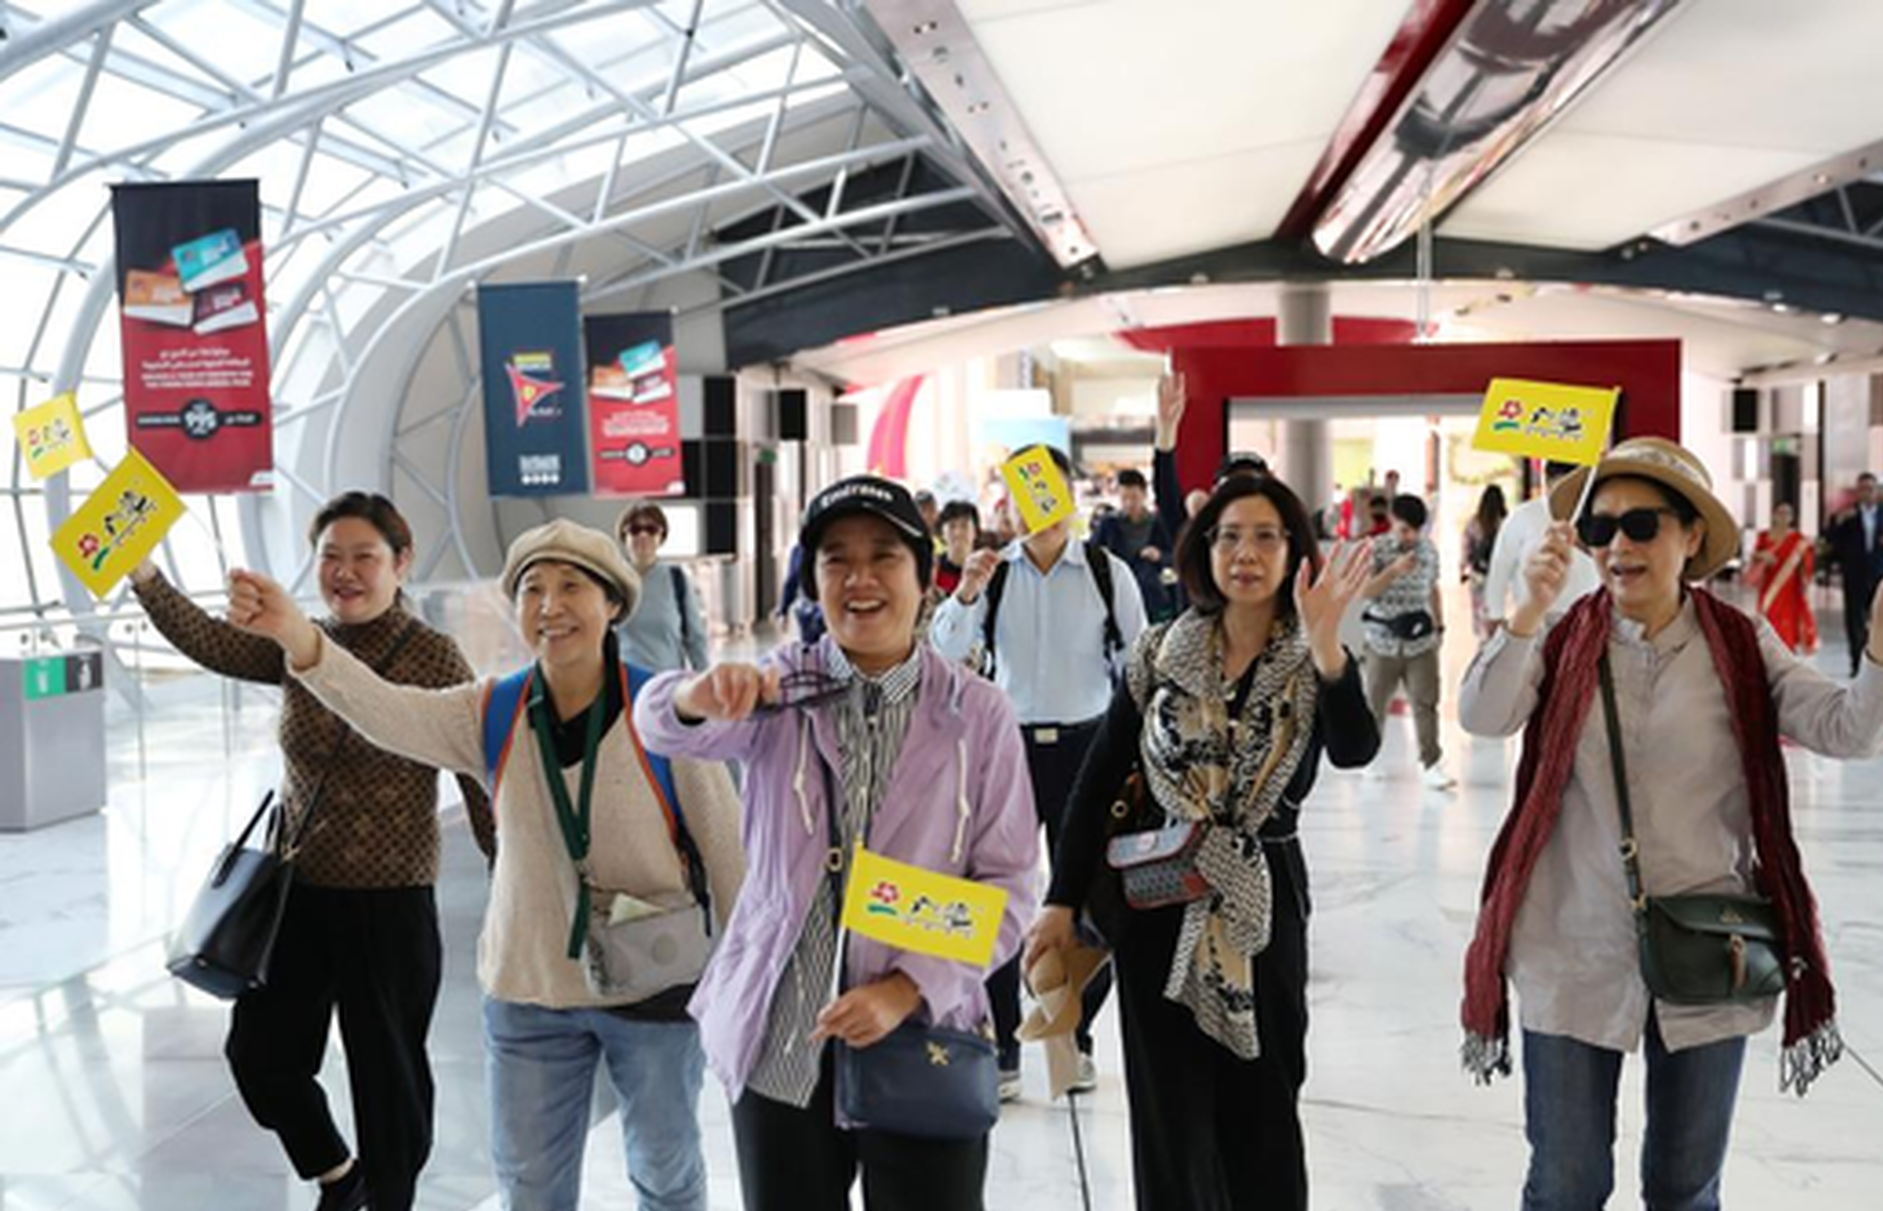 Middle East eyes tourists from China